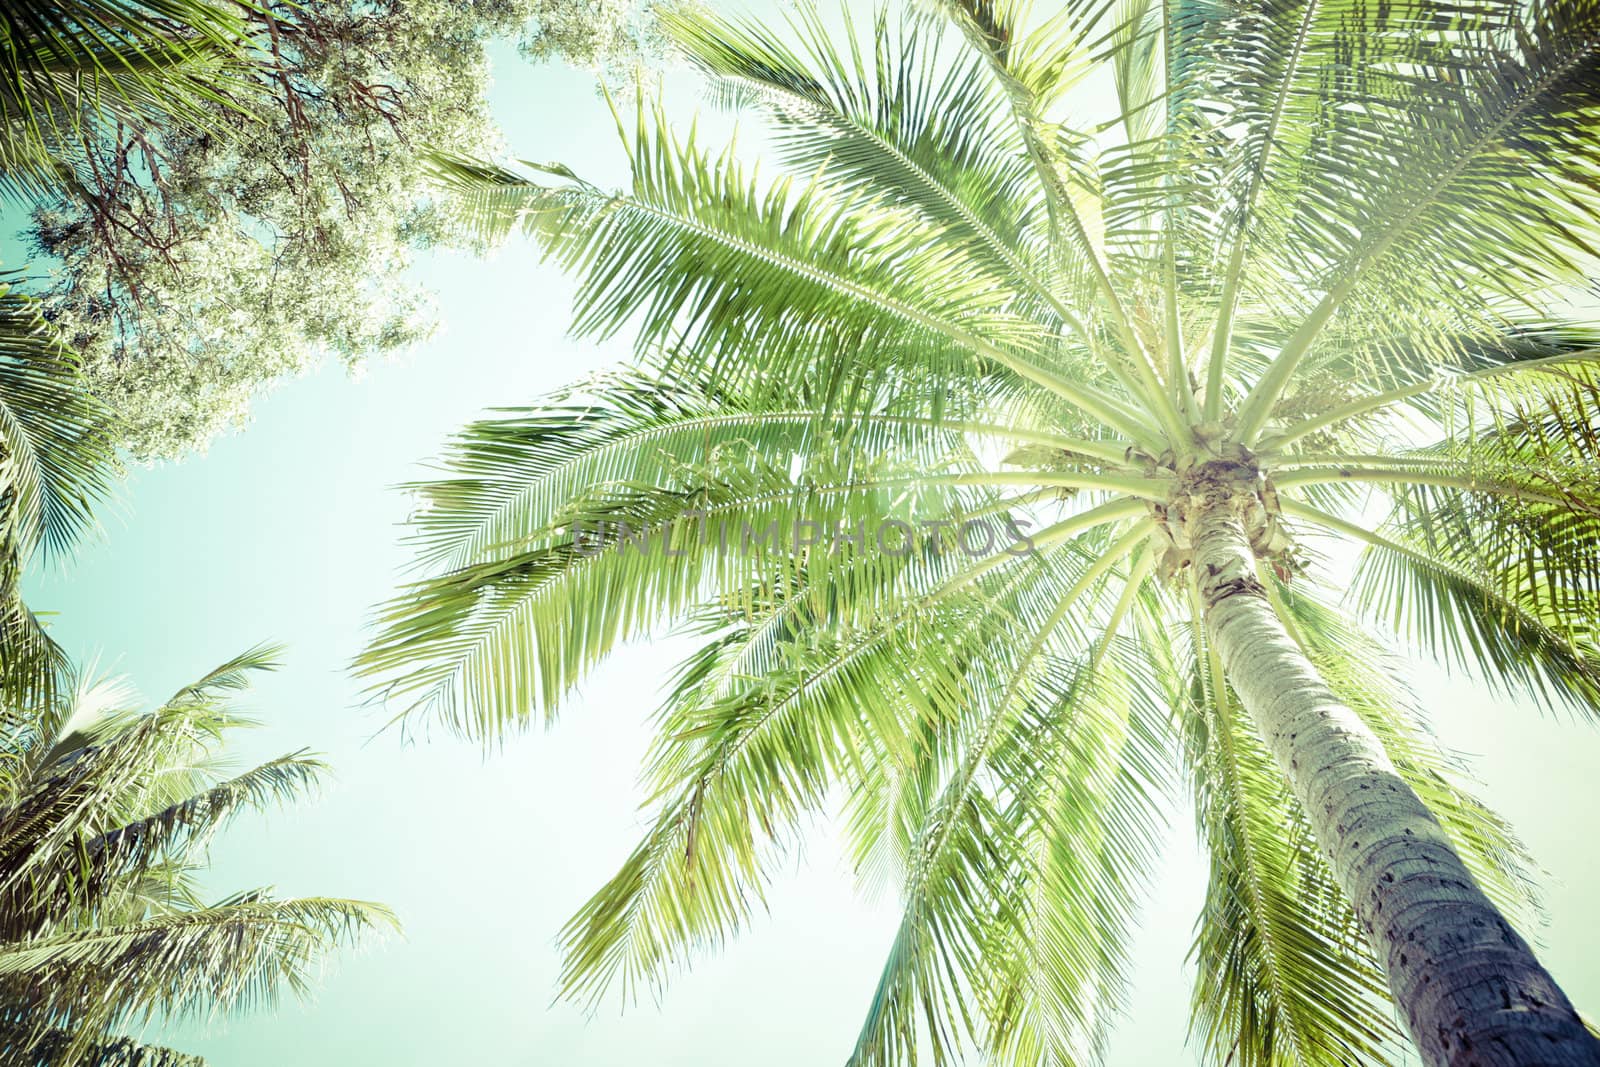 Looking up from the base into the green canopy and fronds of a palm tree against a sunny blue sky conceptual of a summer vacation and tropical travel